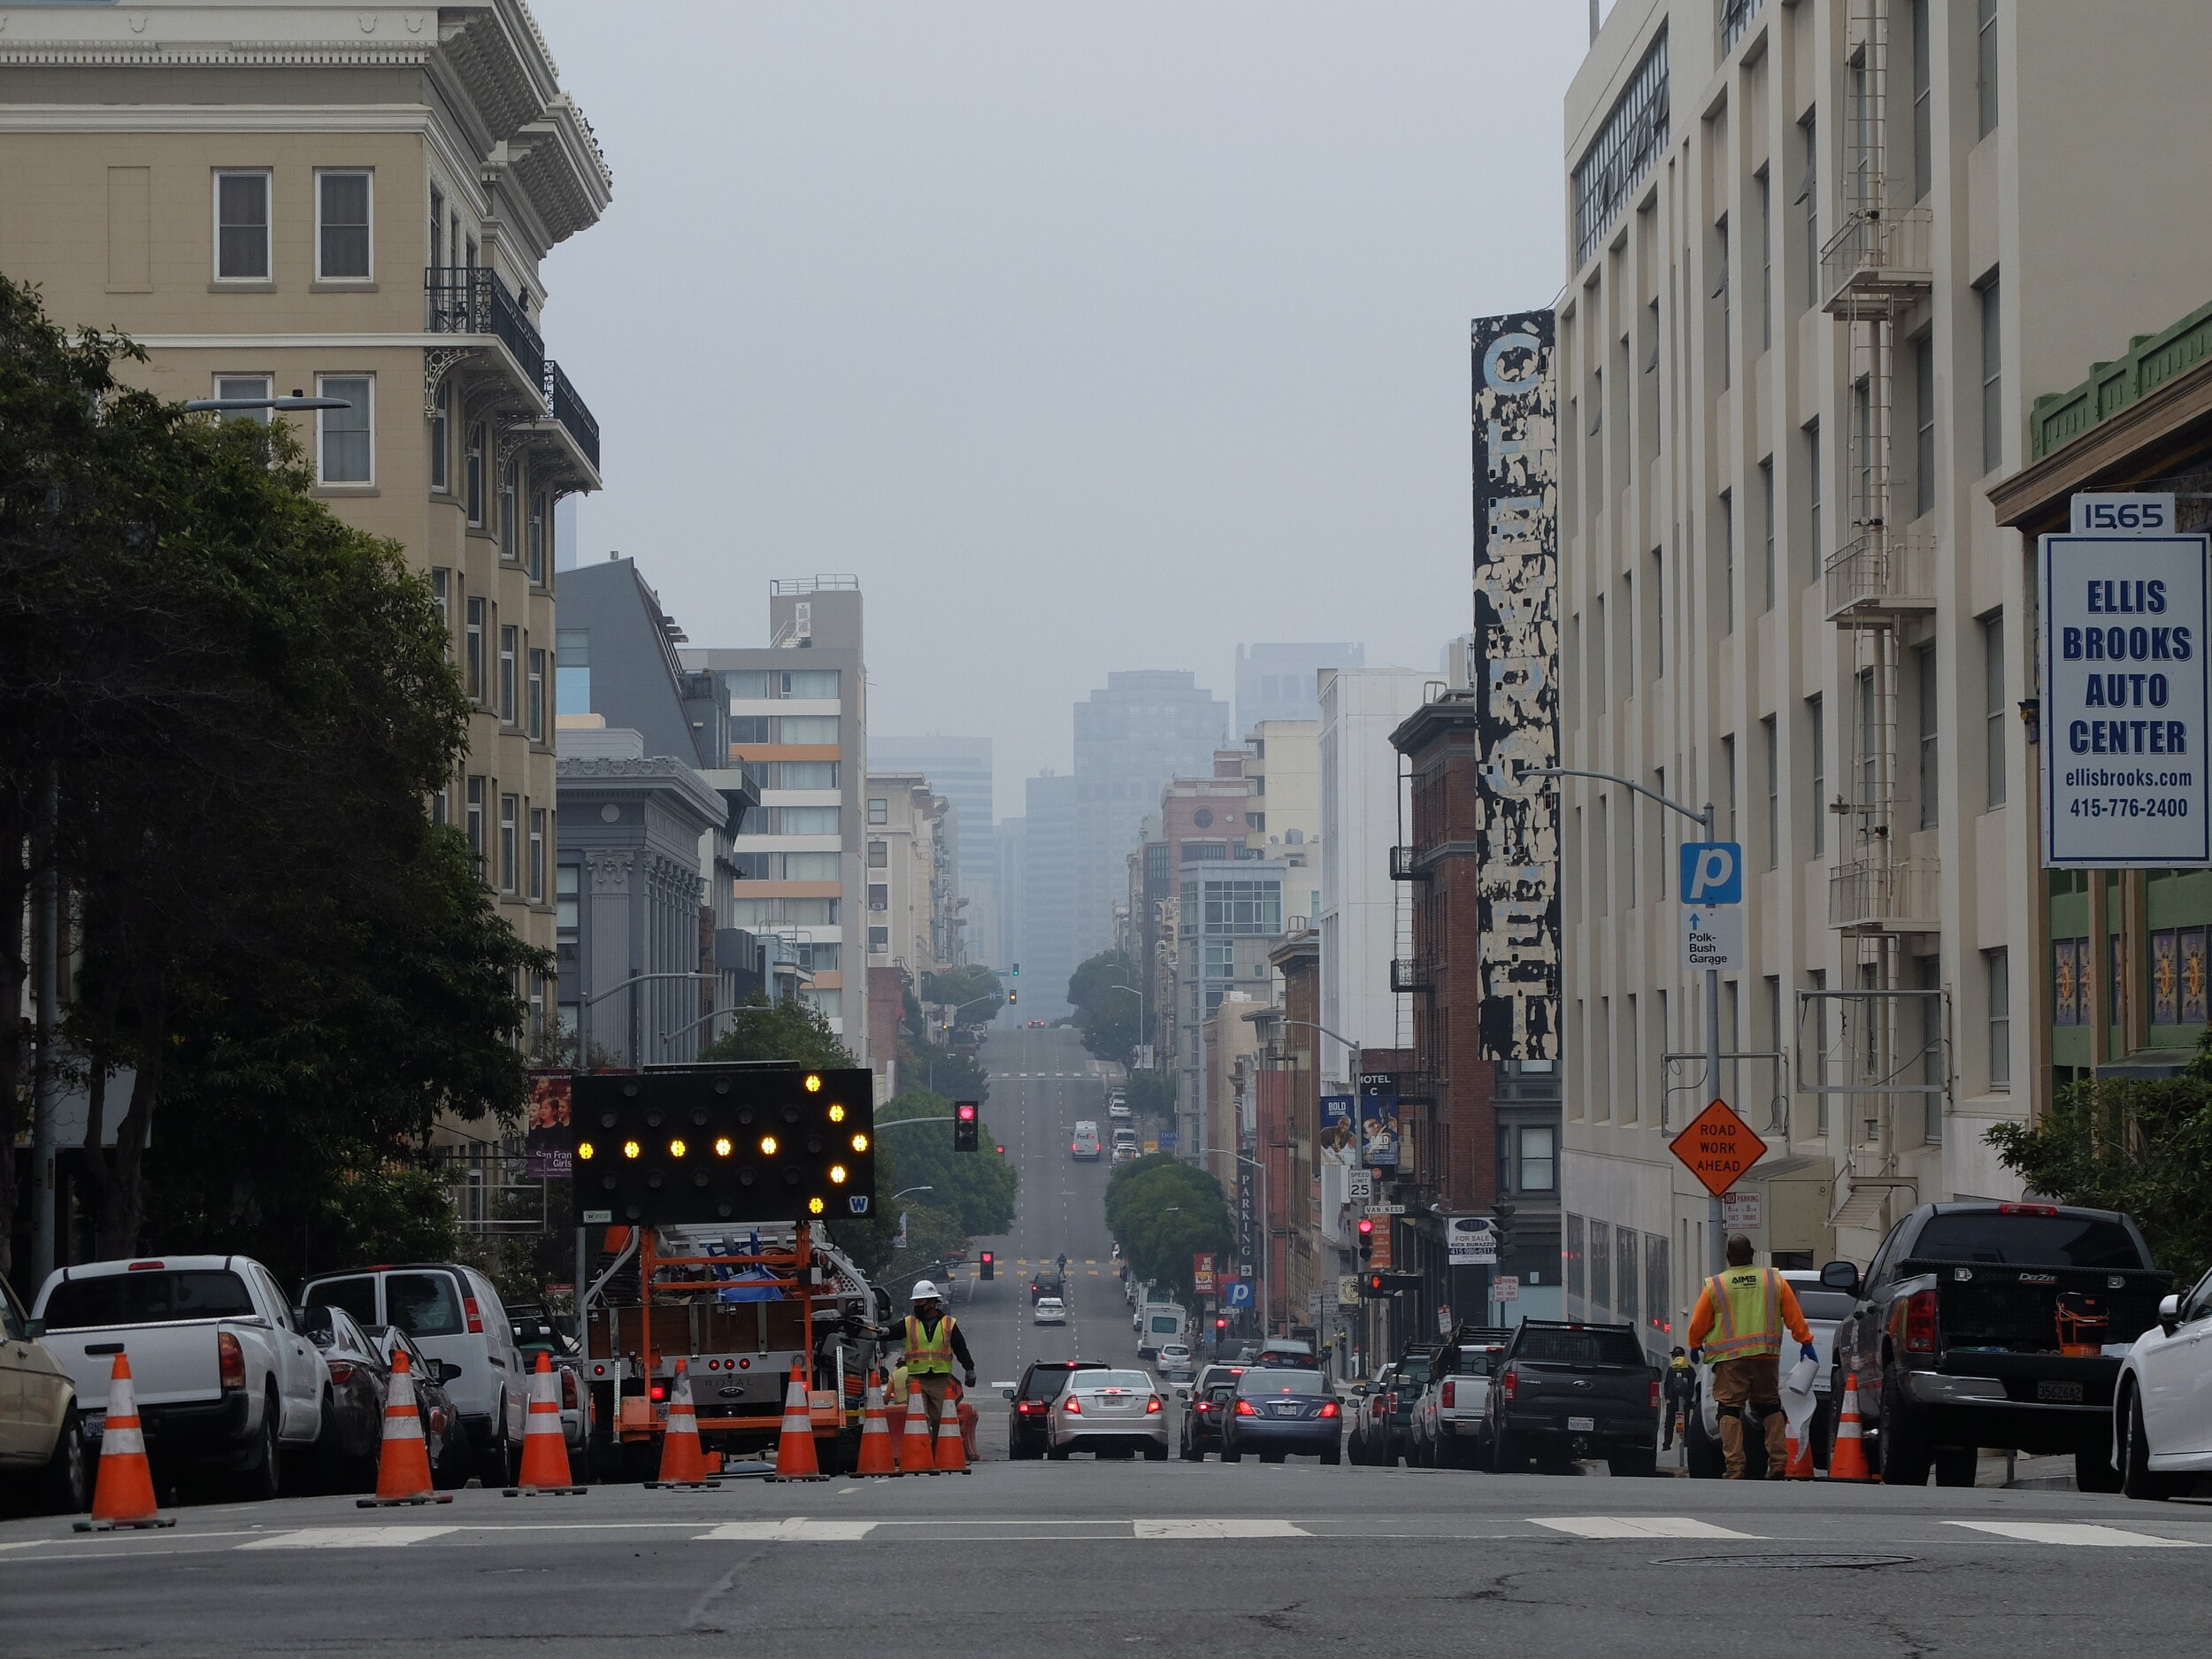 A visit to San Francisco for a dental appointment was a dreary excursion.